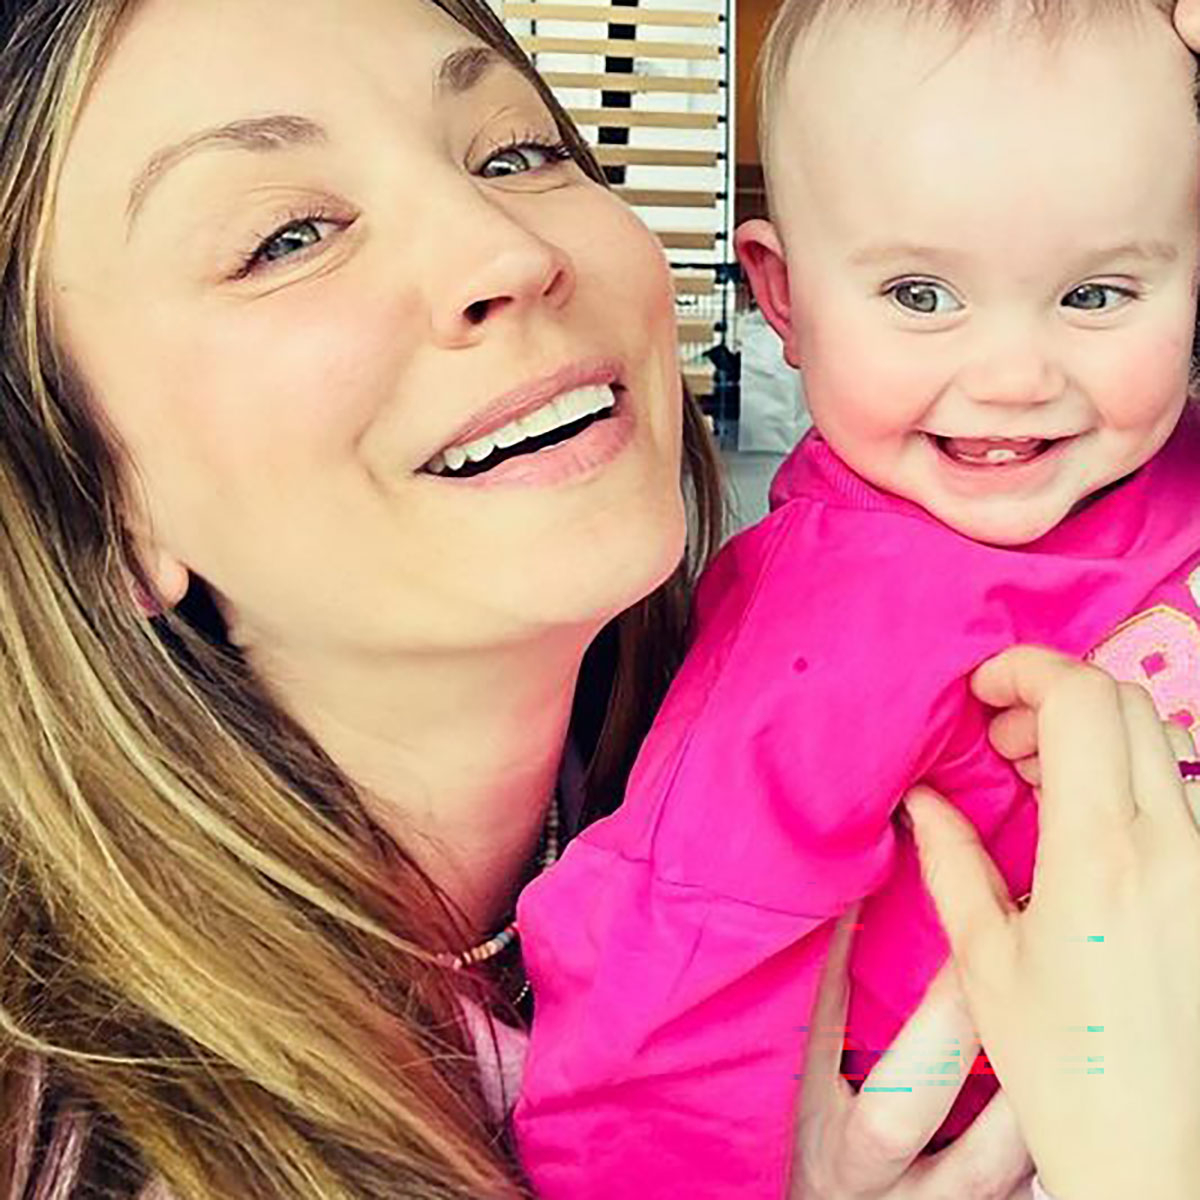 How Kaley Cuoco’s Daughter Matilda Is Already Reaching New Heights